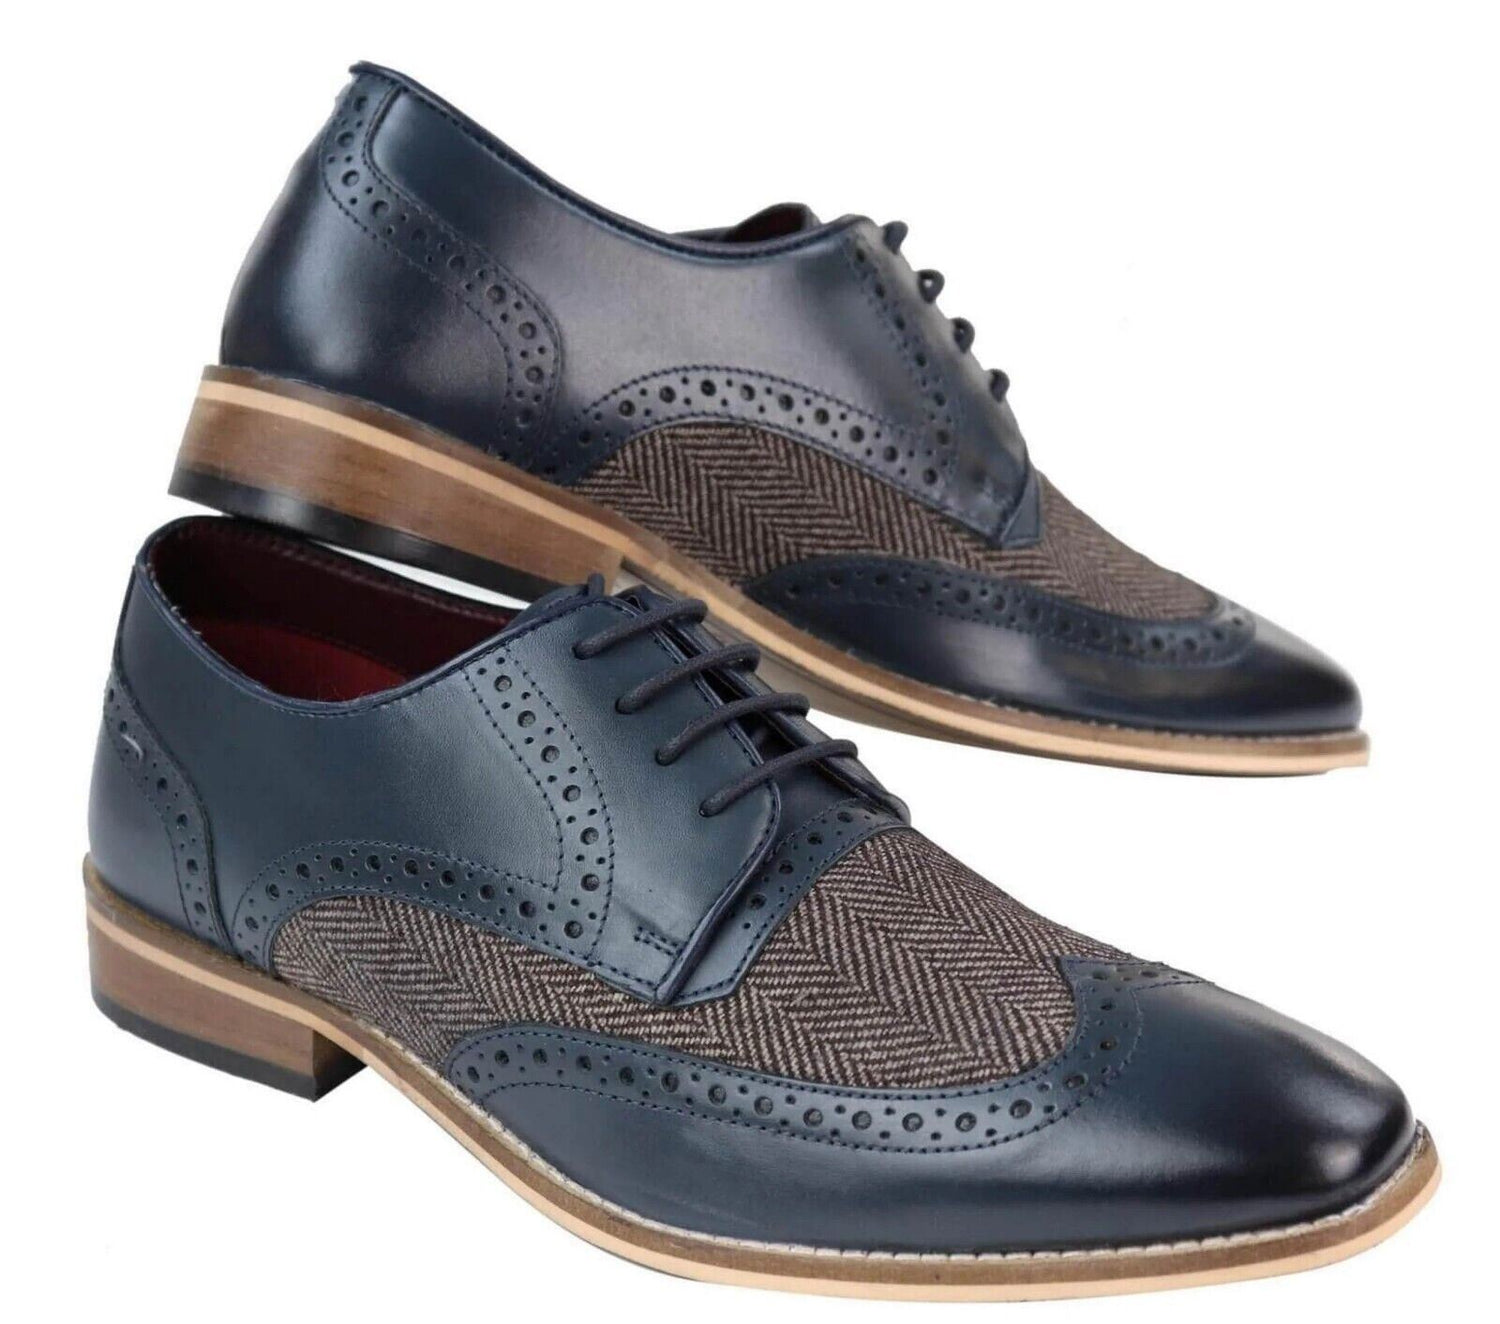 Mens Classic Oxford Navy Brogue Derby Shoes in Tan Leather